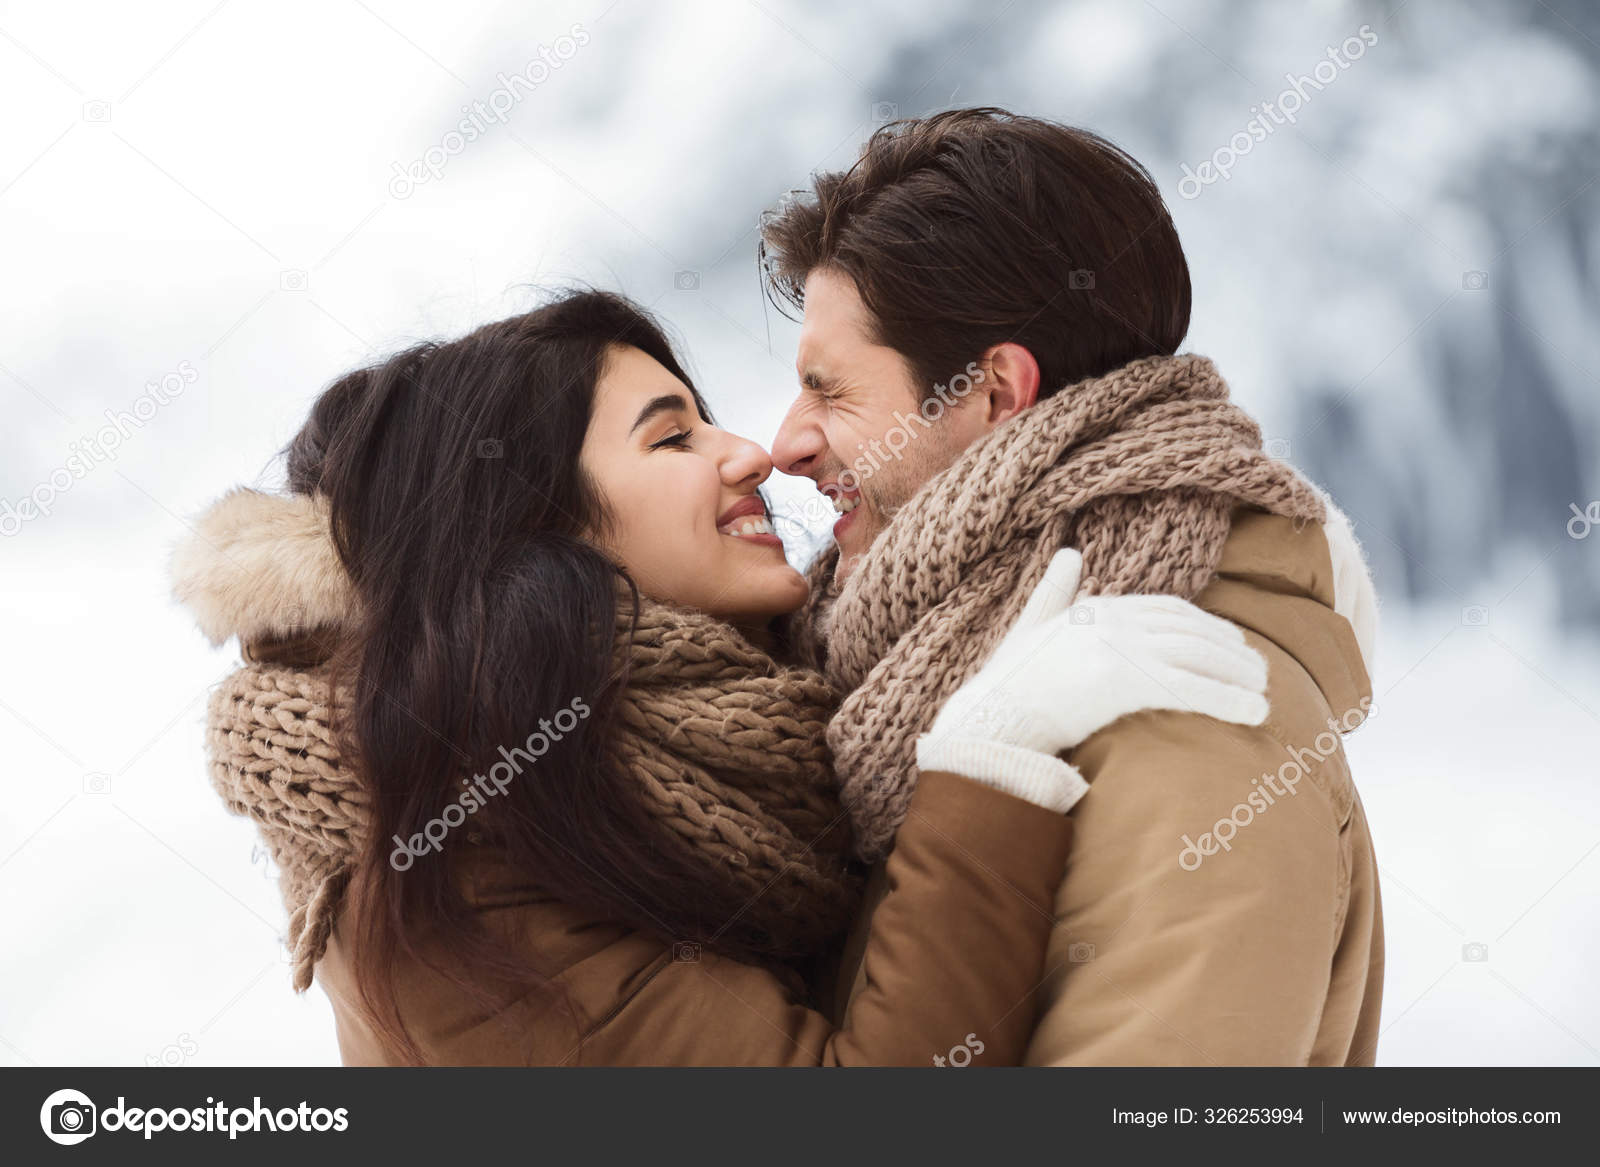 Cute Lovers Rubbing Their Noses Embracing Standing In Snowy Park